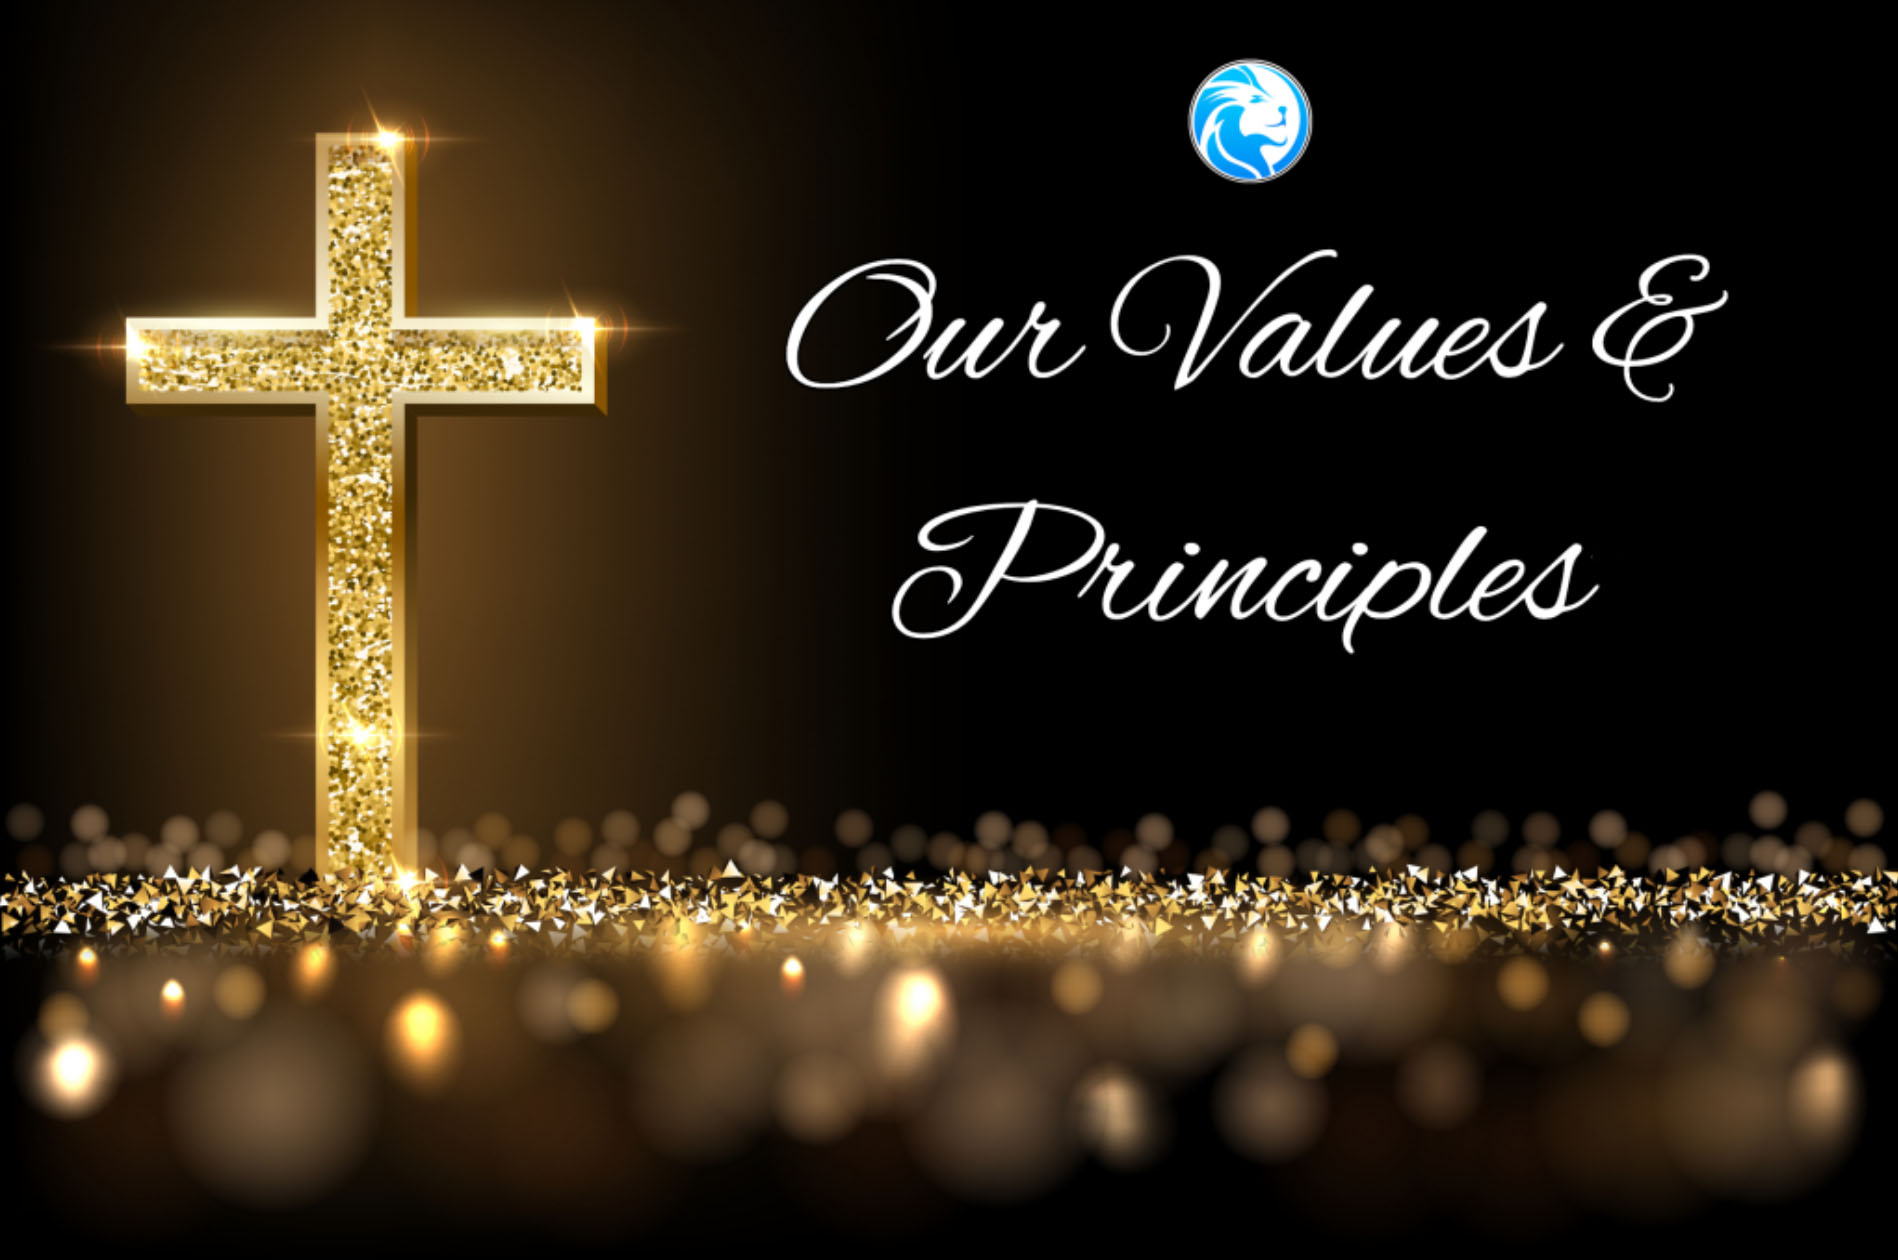 808 Lion Lifestyle Values And Principles